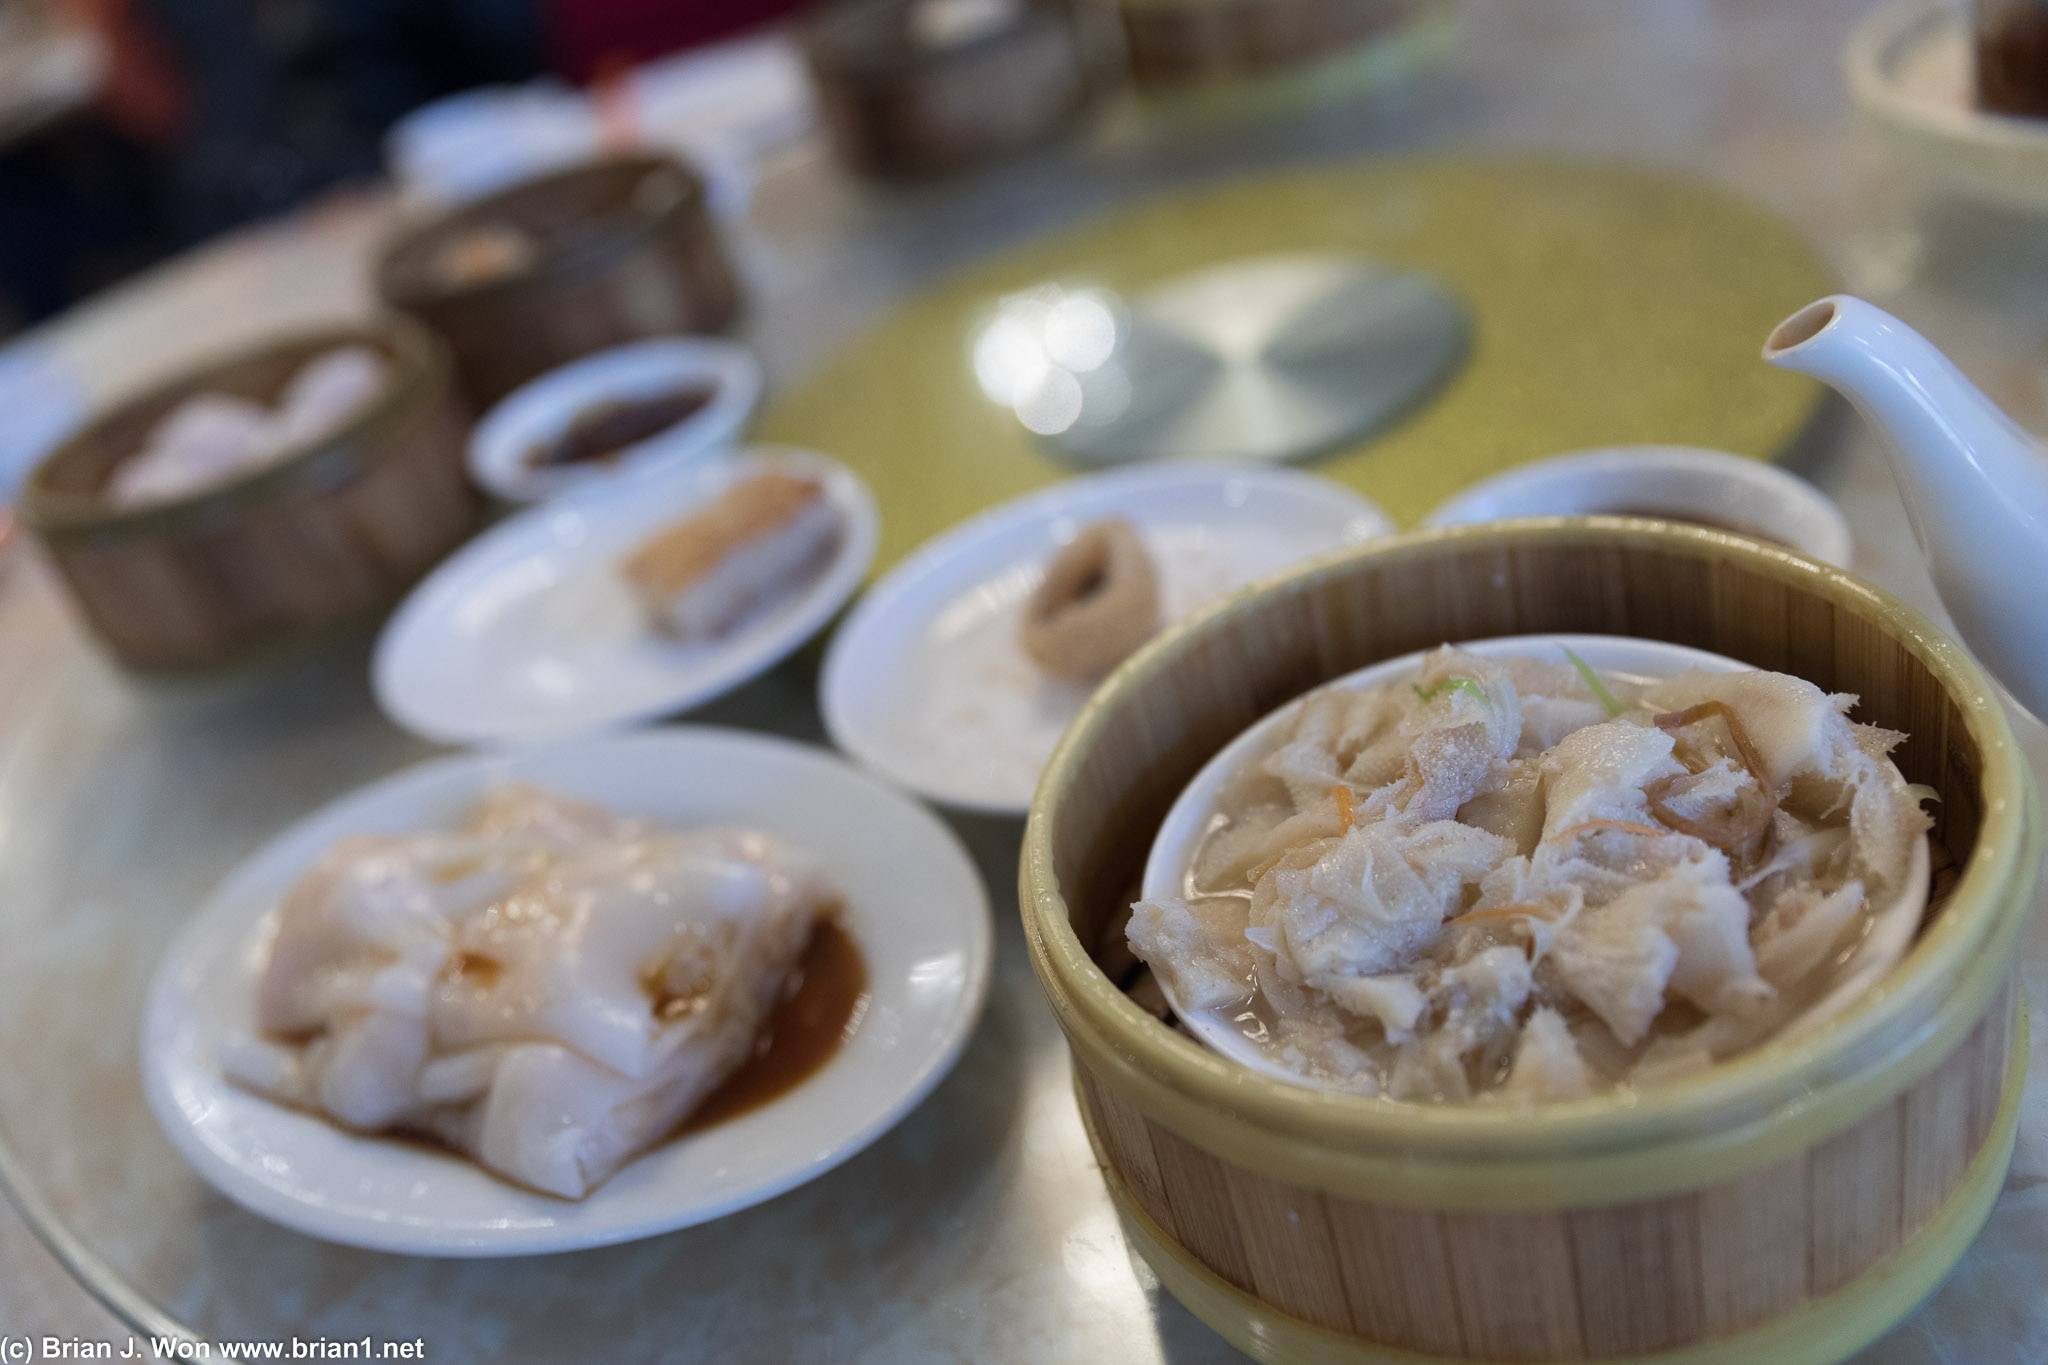 Tripe was okay. Kinda of like the har cheung fun-- both could use a lot of improvement.